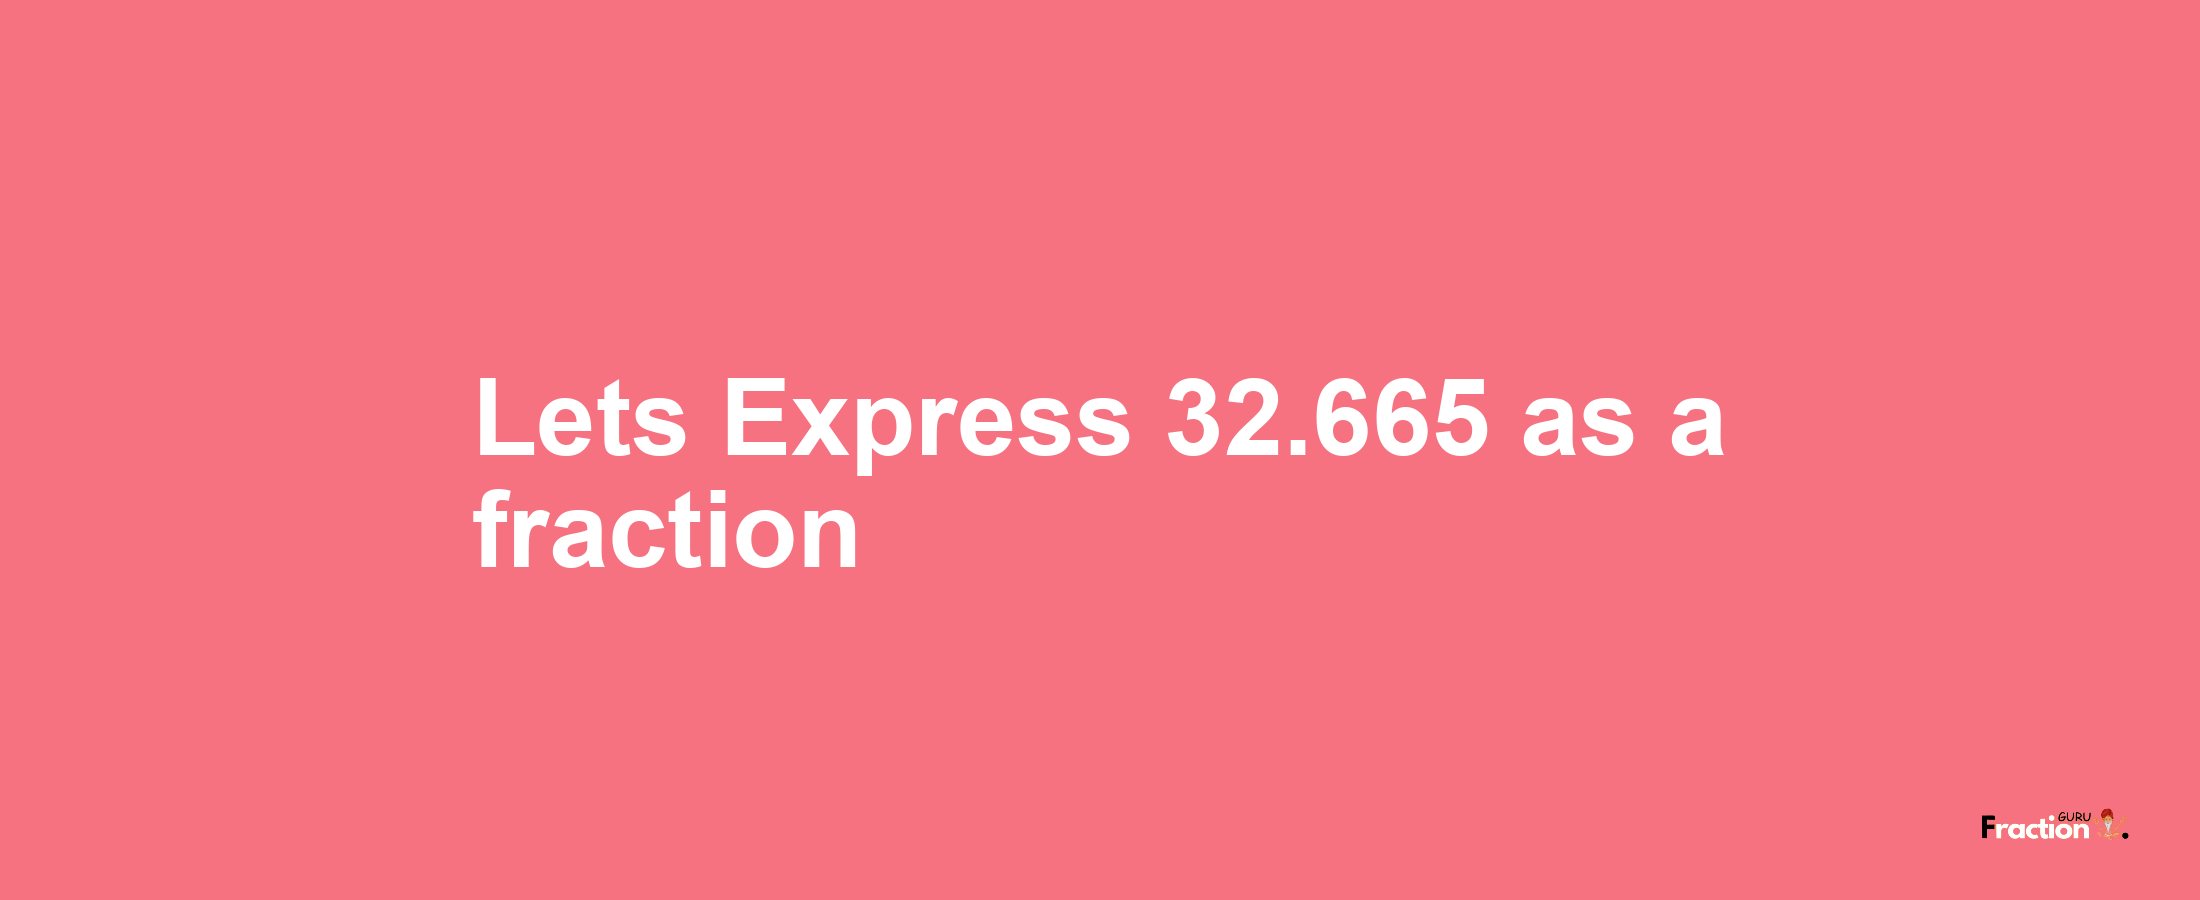 Lets Express 32.665 as afraction